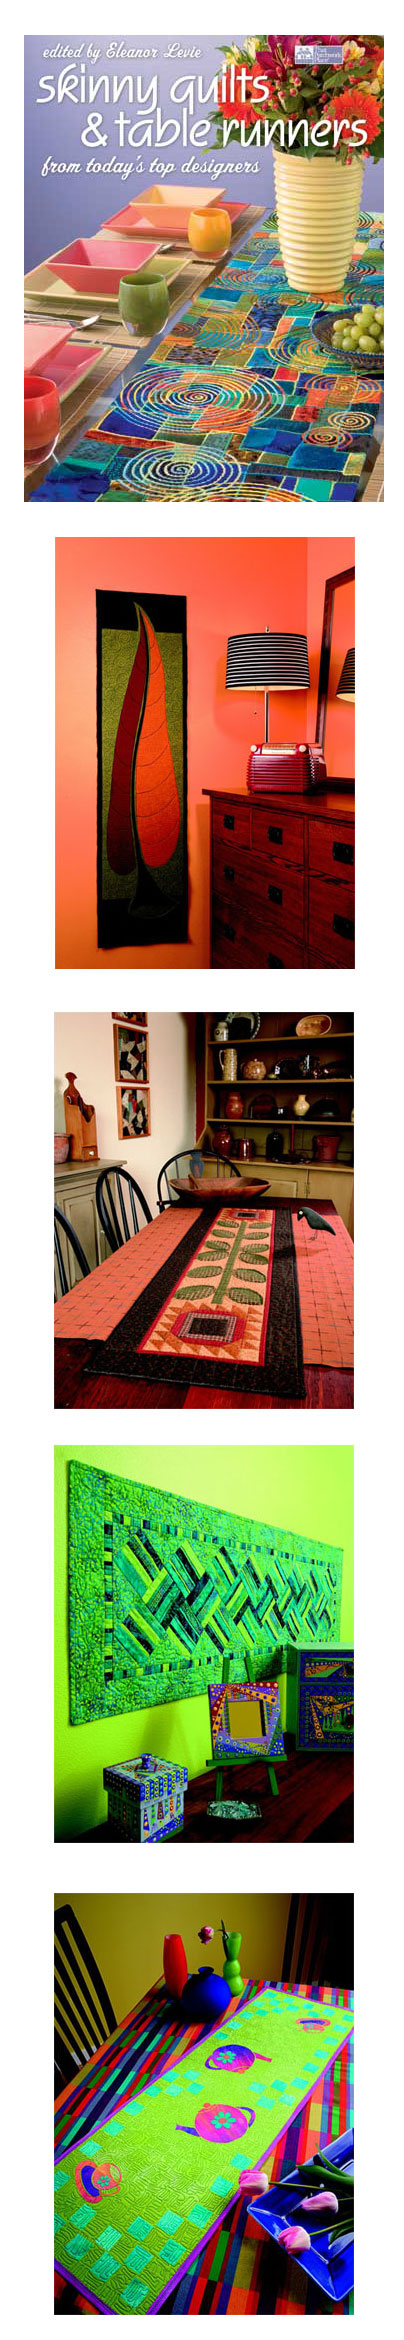 Skinny Quilts & Table Runners